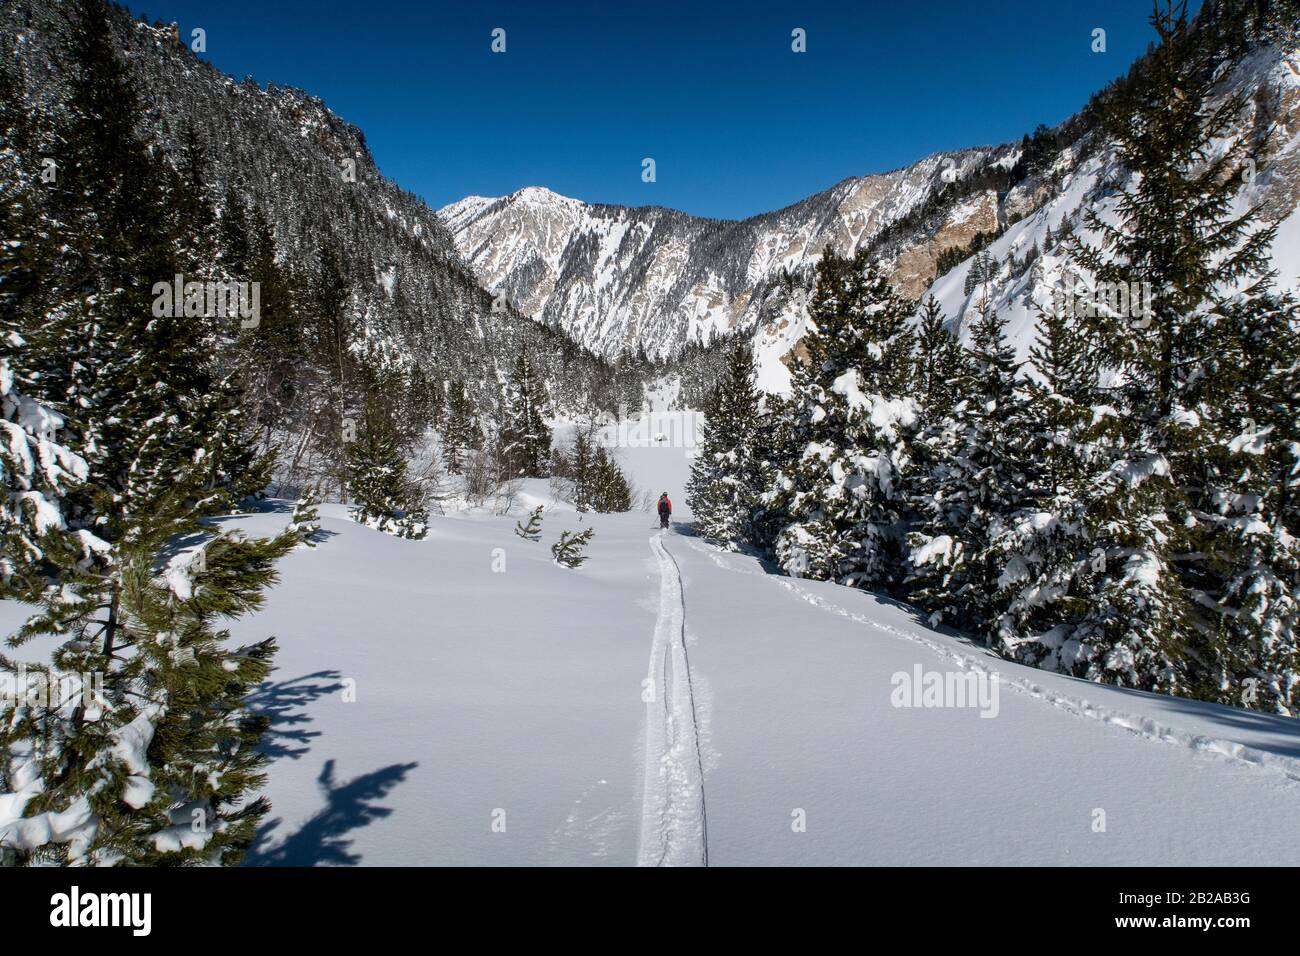 A man ski tours through the Vallée des Avals near the French alpine resort of Courchevel after fresh snowfall on a sunny day. Stock Photo